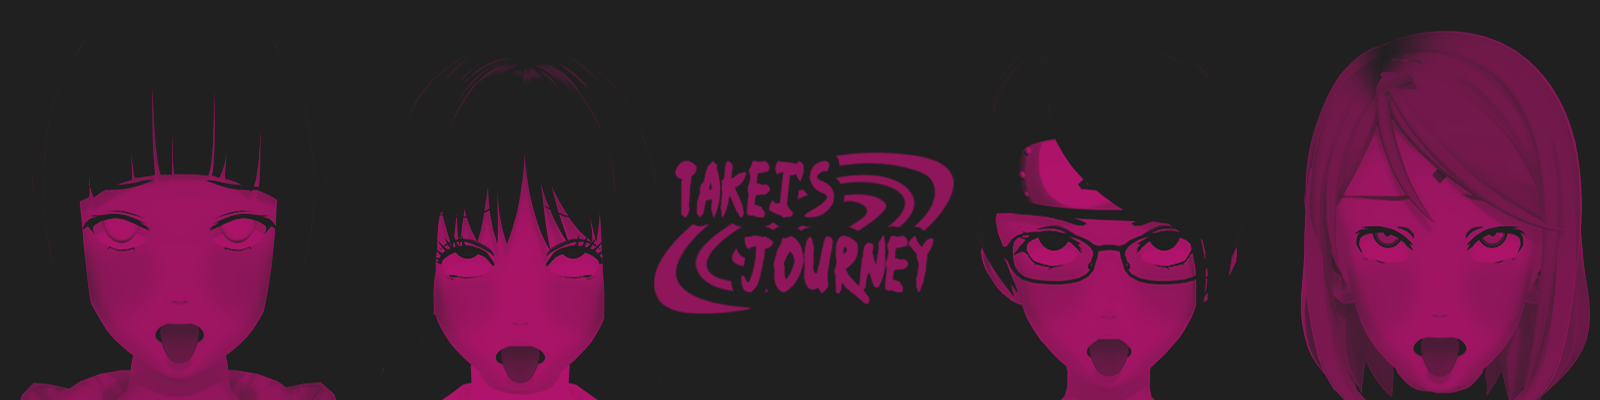 Takei's Journey game banner